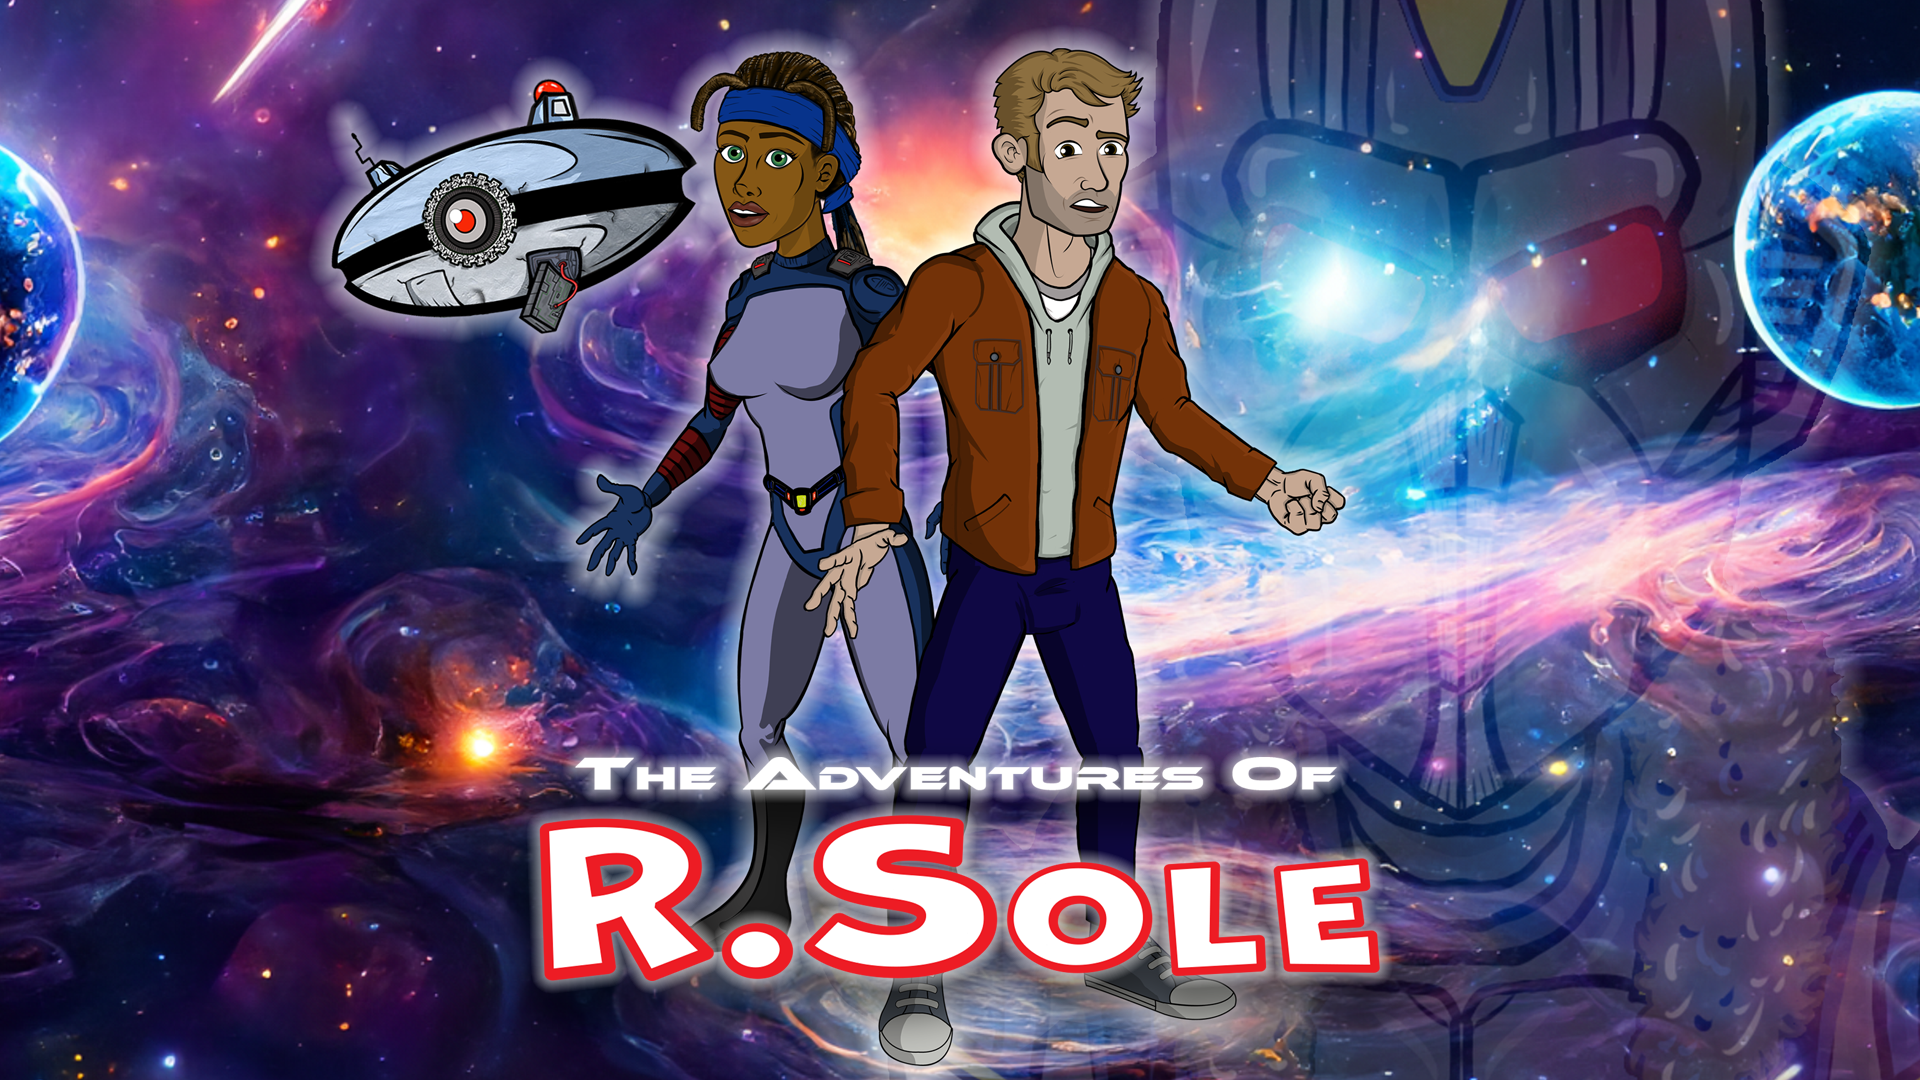 The Adventures Of R Sole Game Screenshot